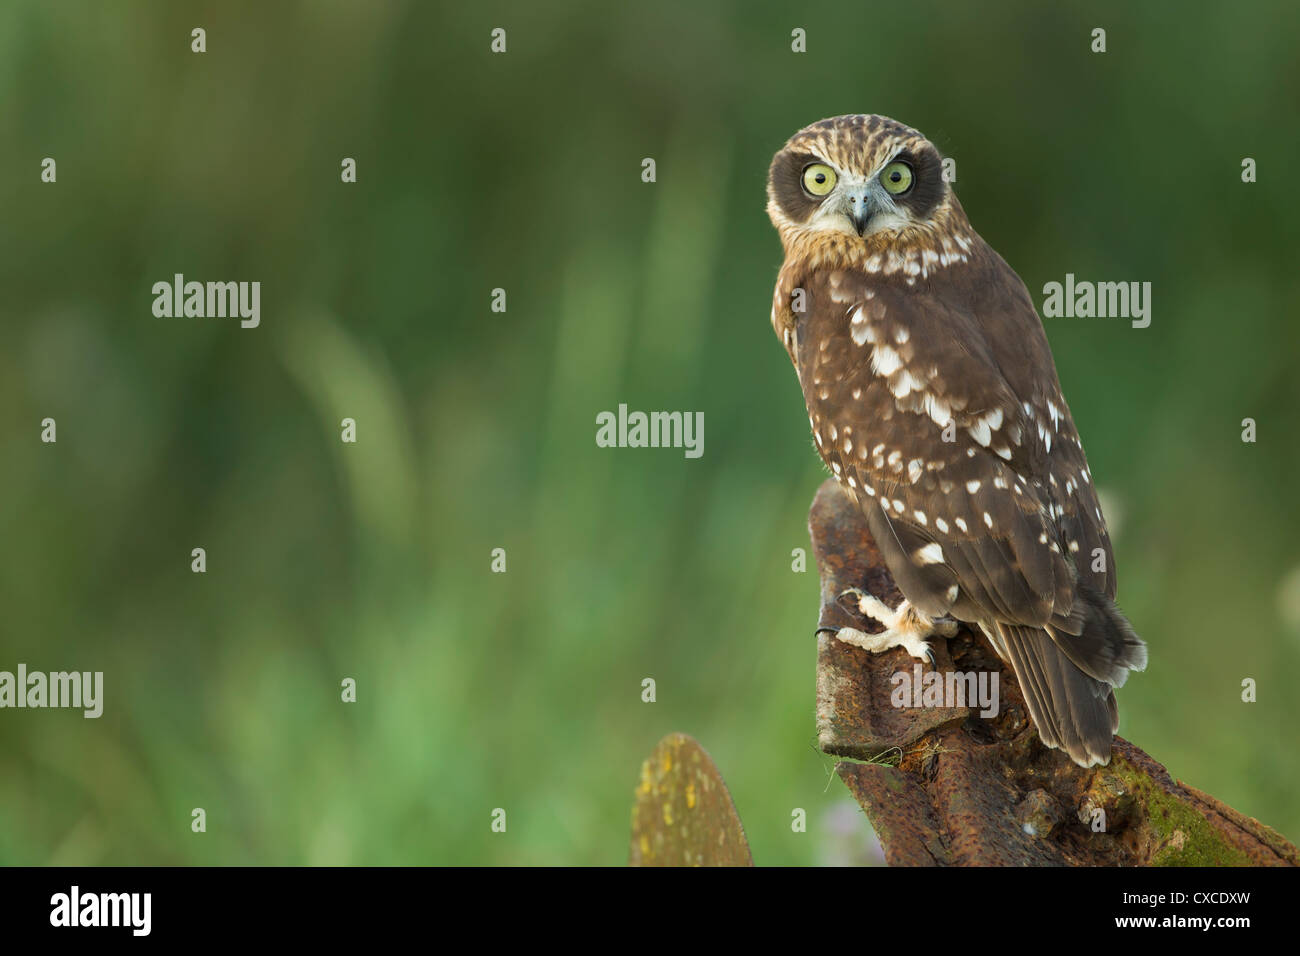 Boobook Owl perched on rusted farm machinery Stock Photo